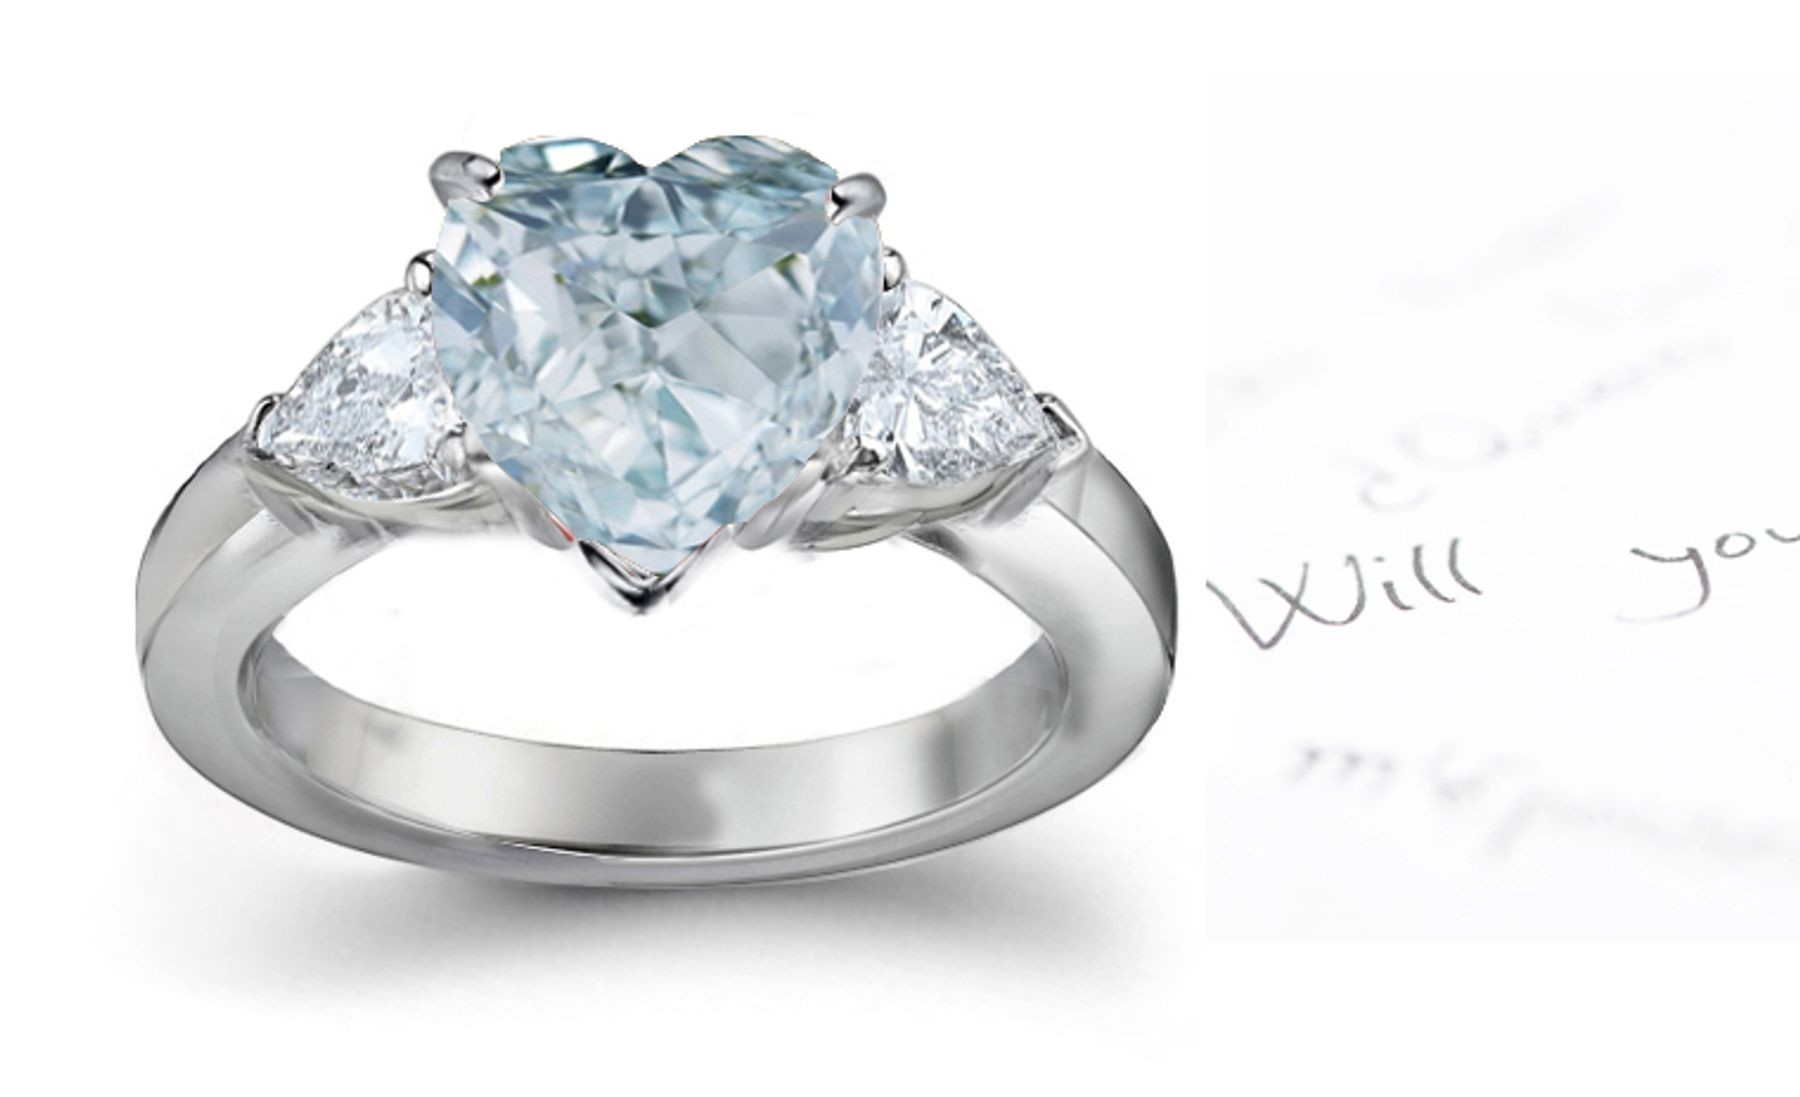 Rare Center Heart Blue Diamond & Pears White Diamonds Accents Engagement Ring in Platinum Mounting White Gold